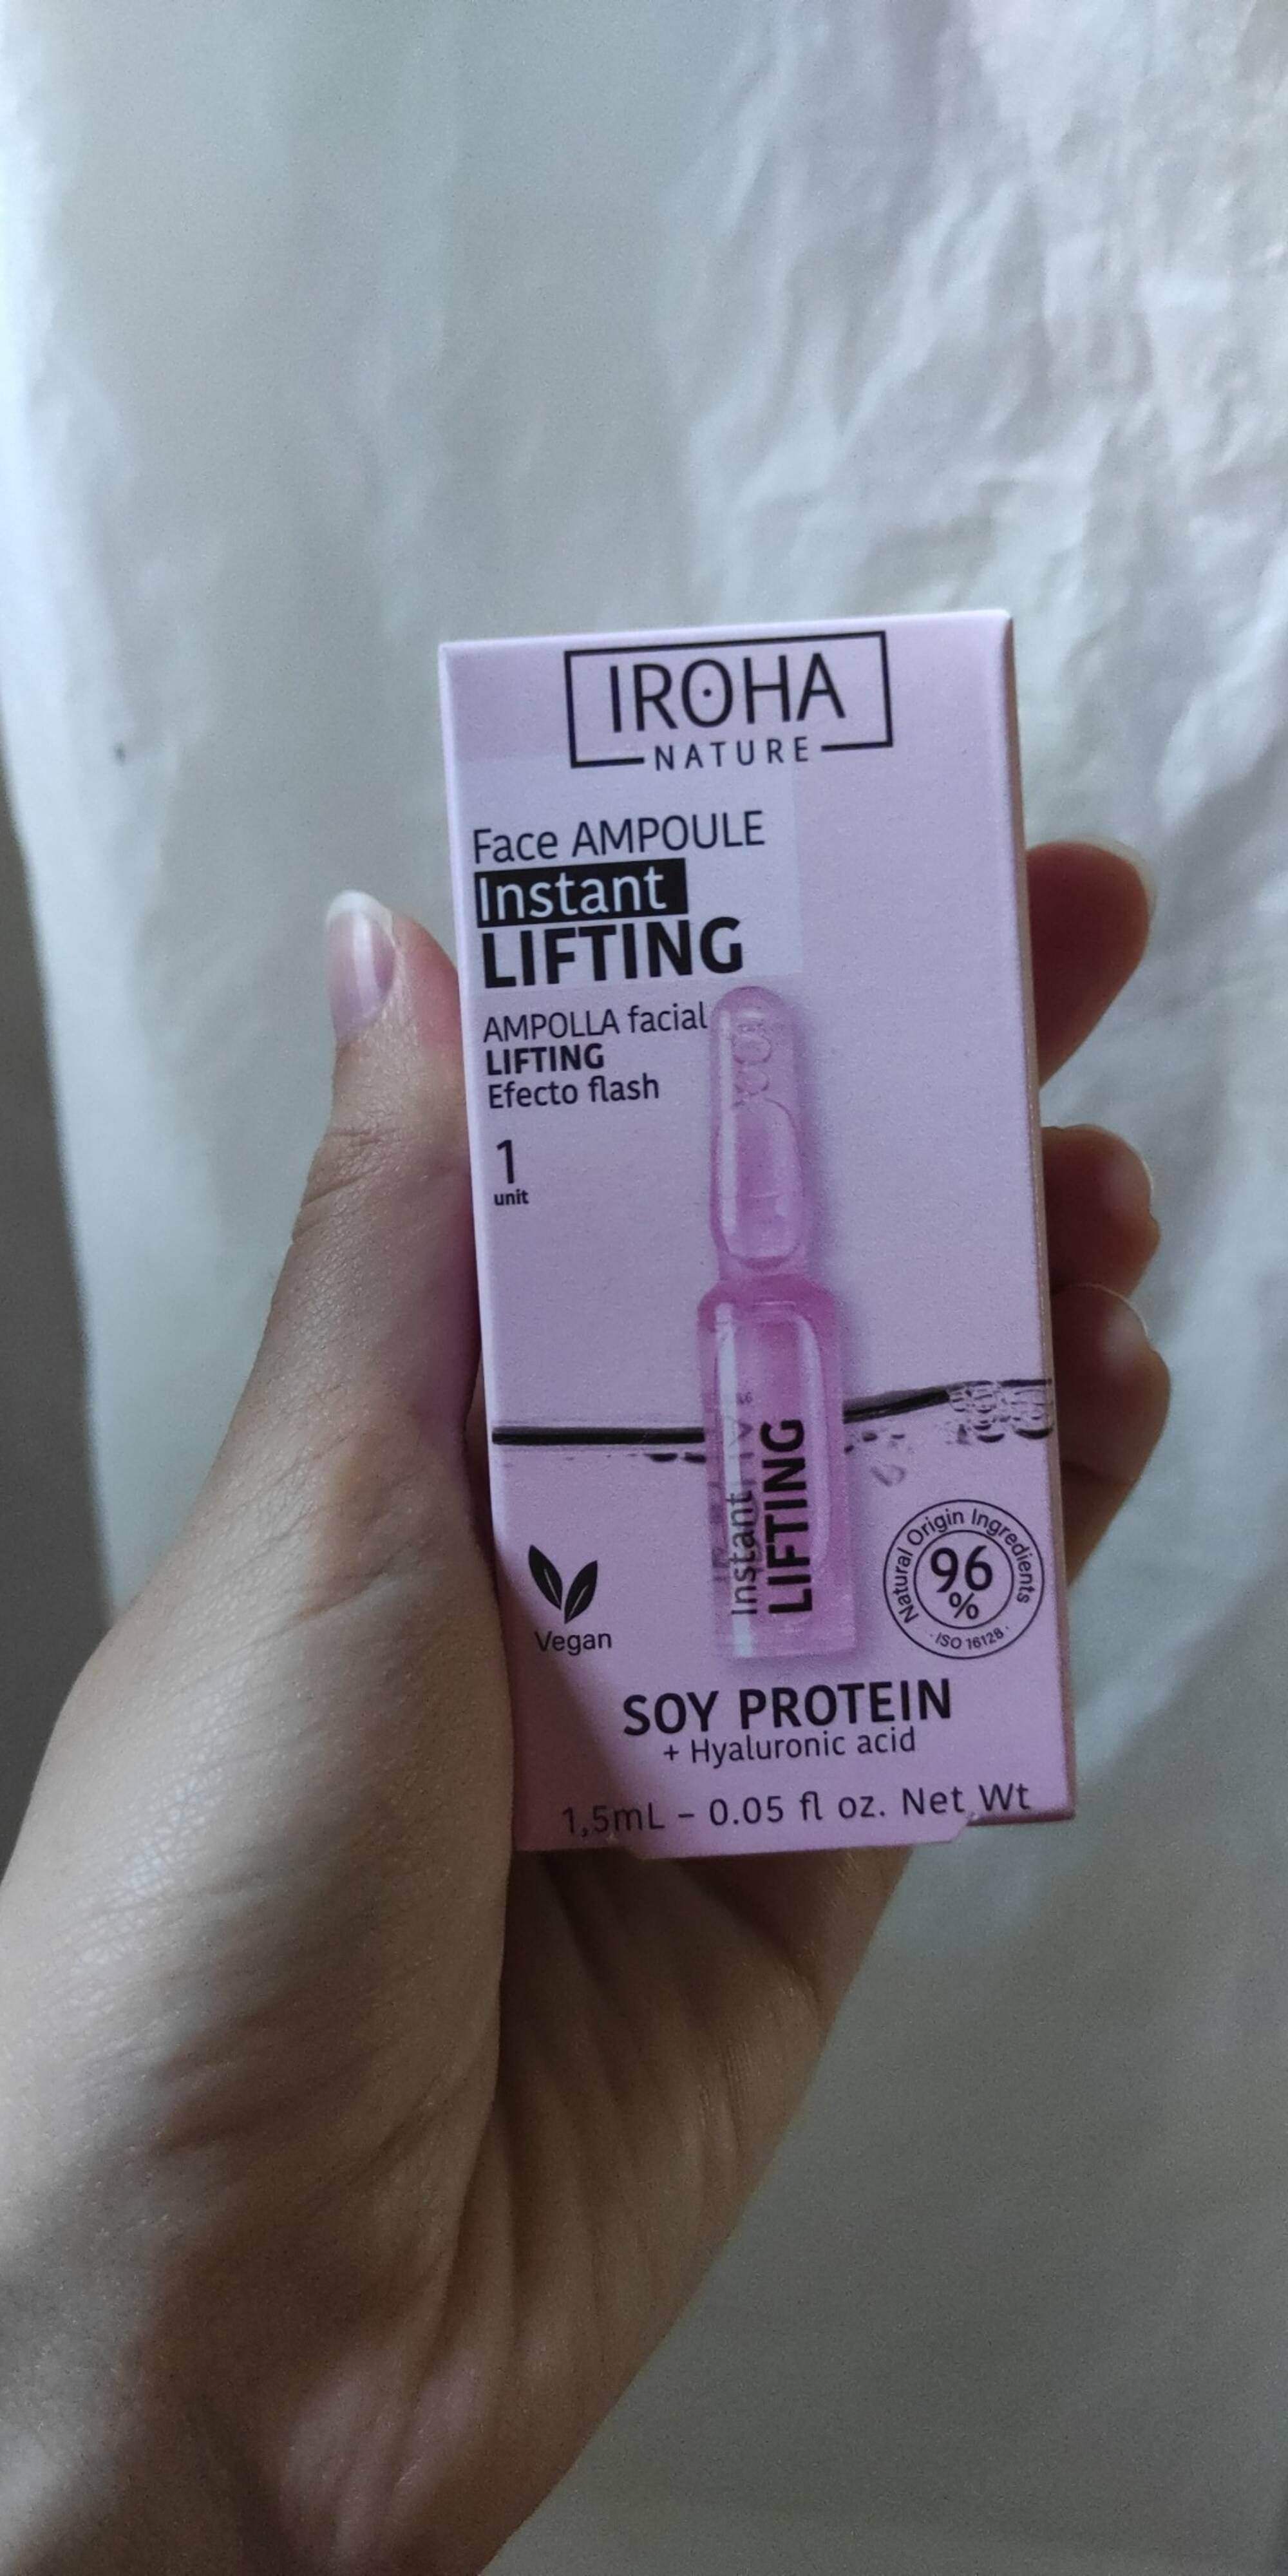 IROHA NATURE - Face ampoule instant lifting